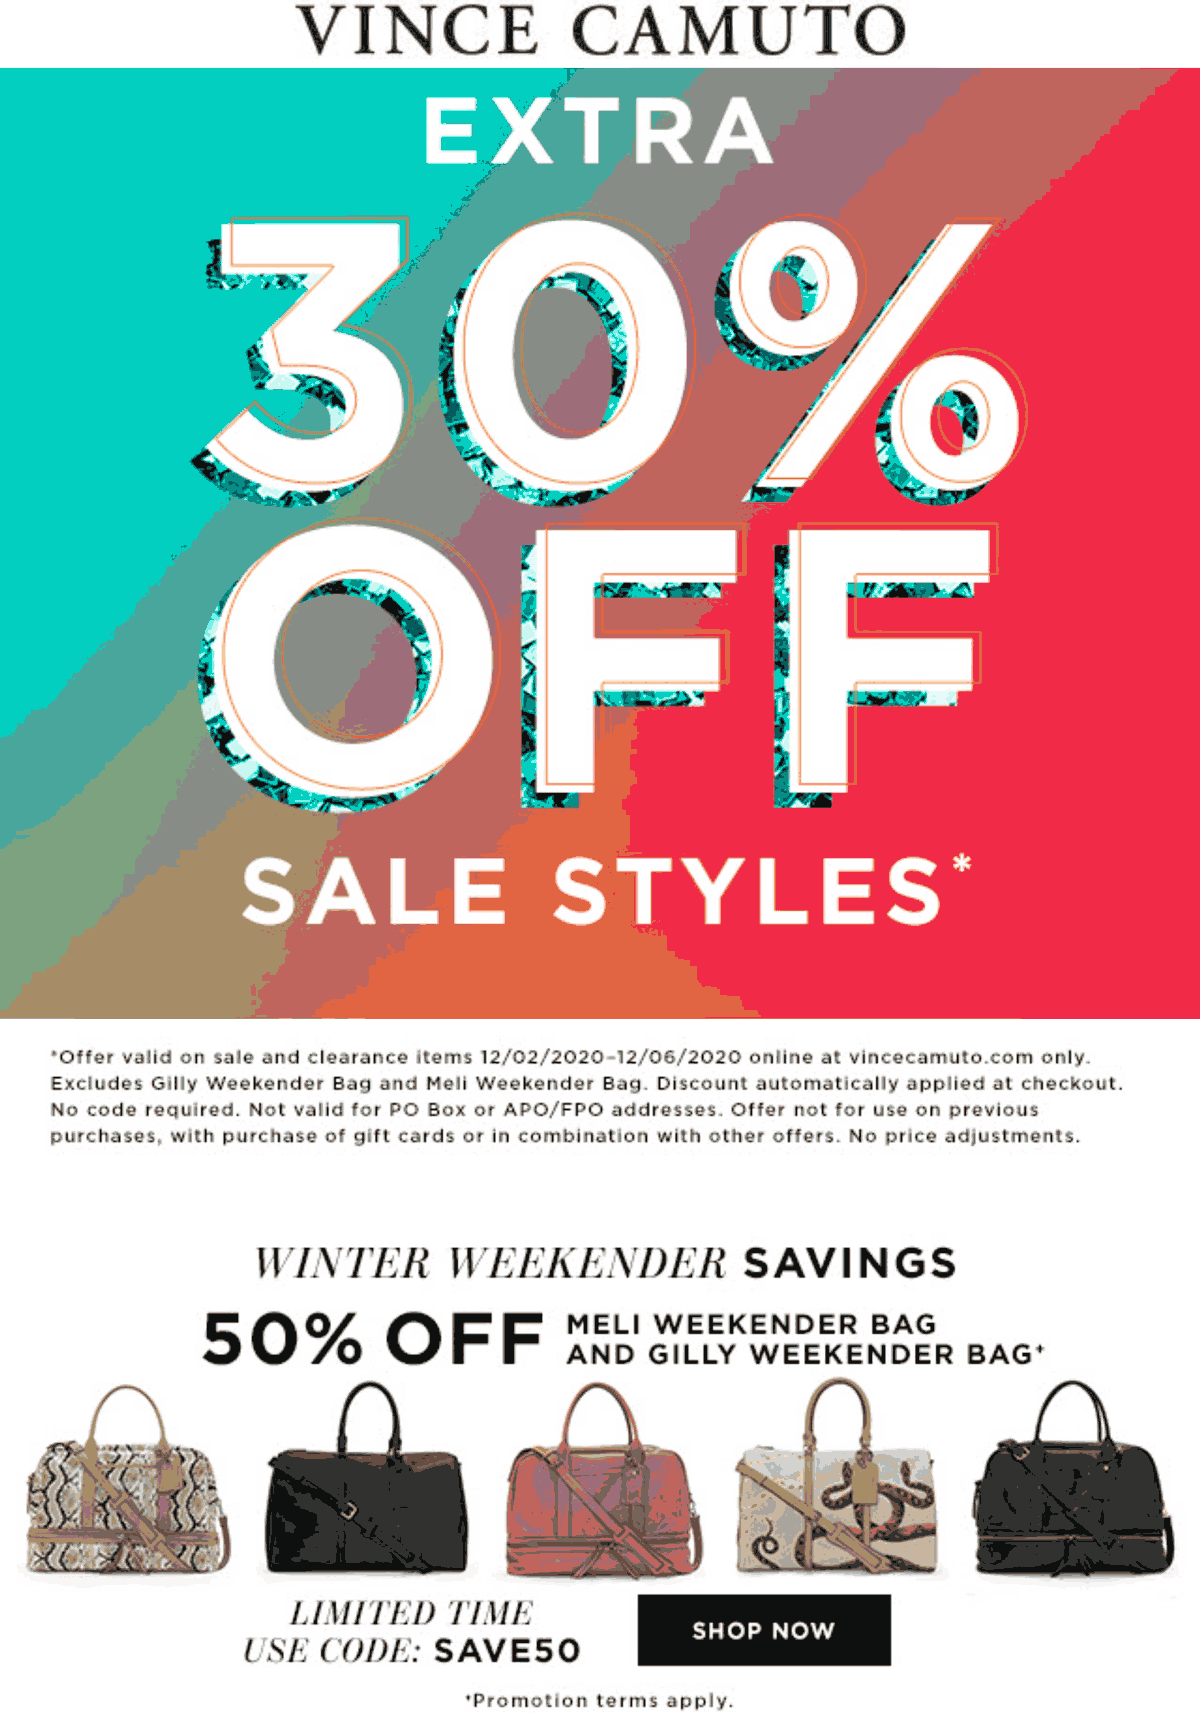 Vince Camuto stores Coupon  Extra 30% off sale items & 50% off weekender bags today at Vince Camuto via promo code SAVE50 #vincecamuto 